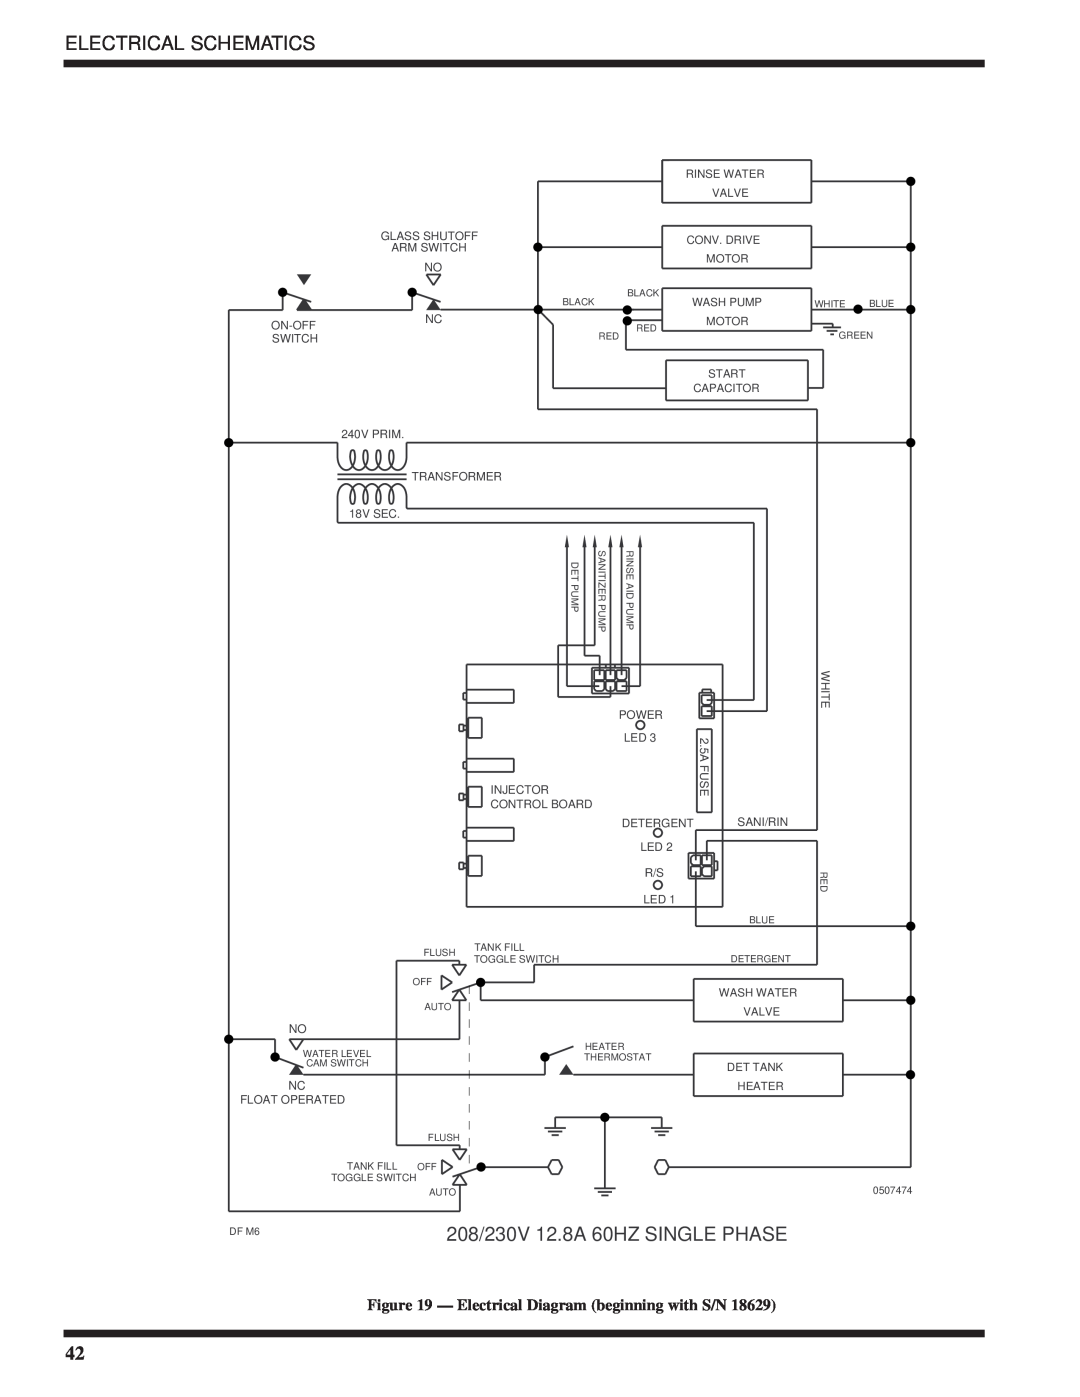 Moyer Diebel DF2-M6, DF-M6 Electrical Schematics, 208/230V 12.8A 60HZ SINGLE PHASE, Electrical Diagram beginning with S/N 